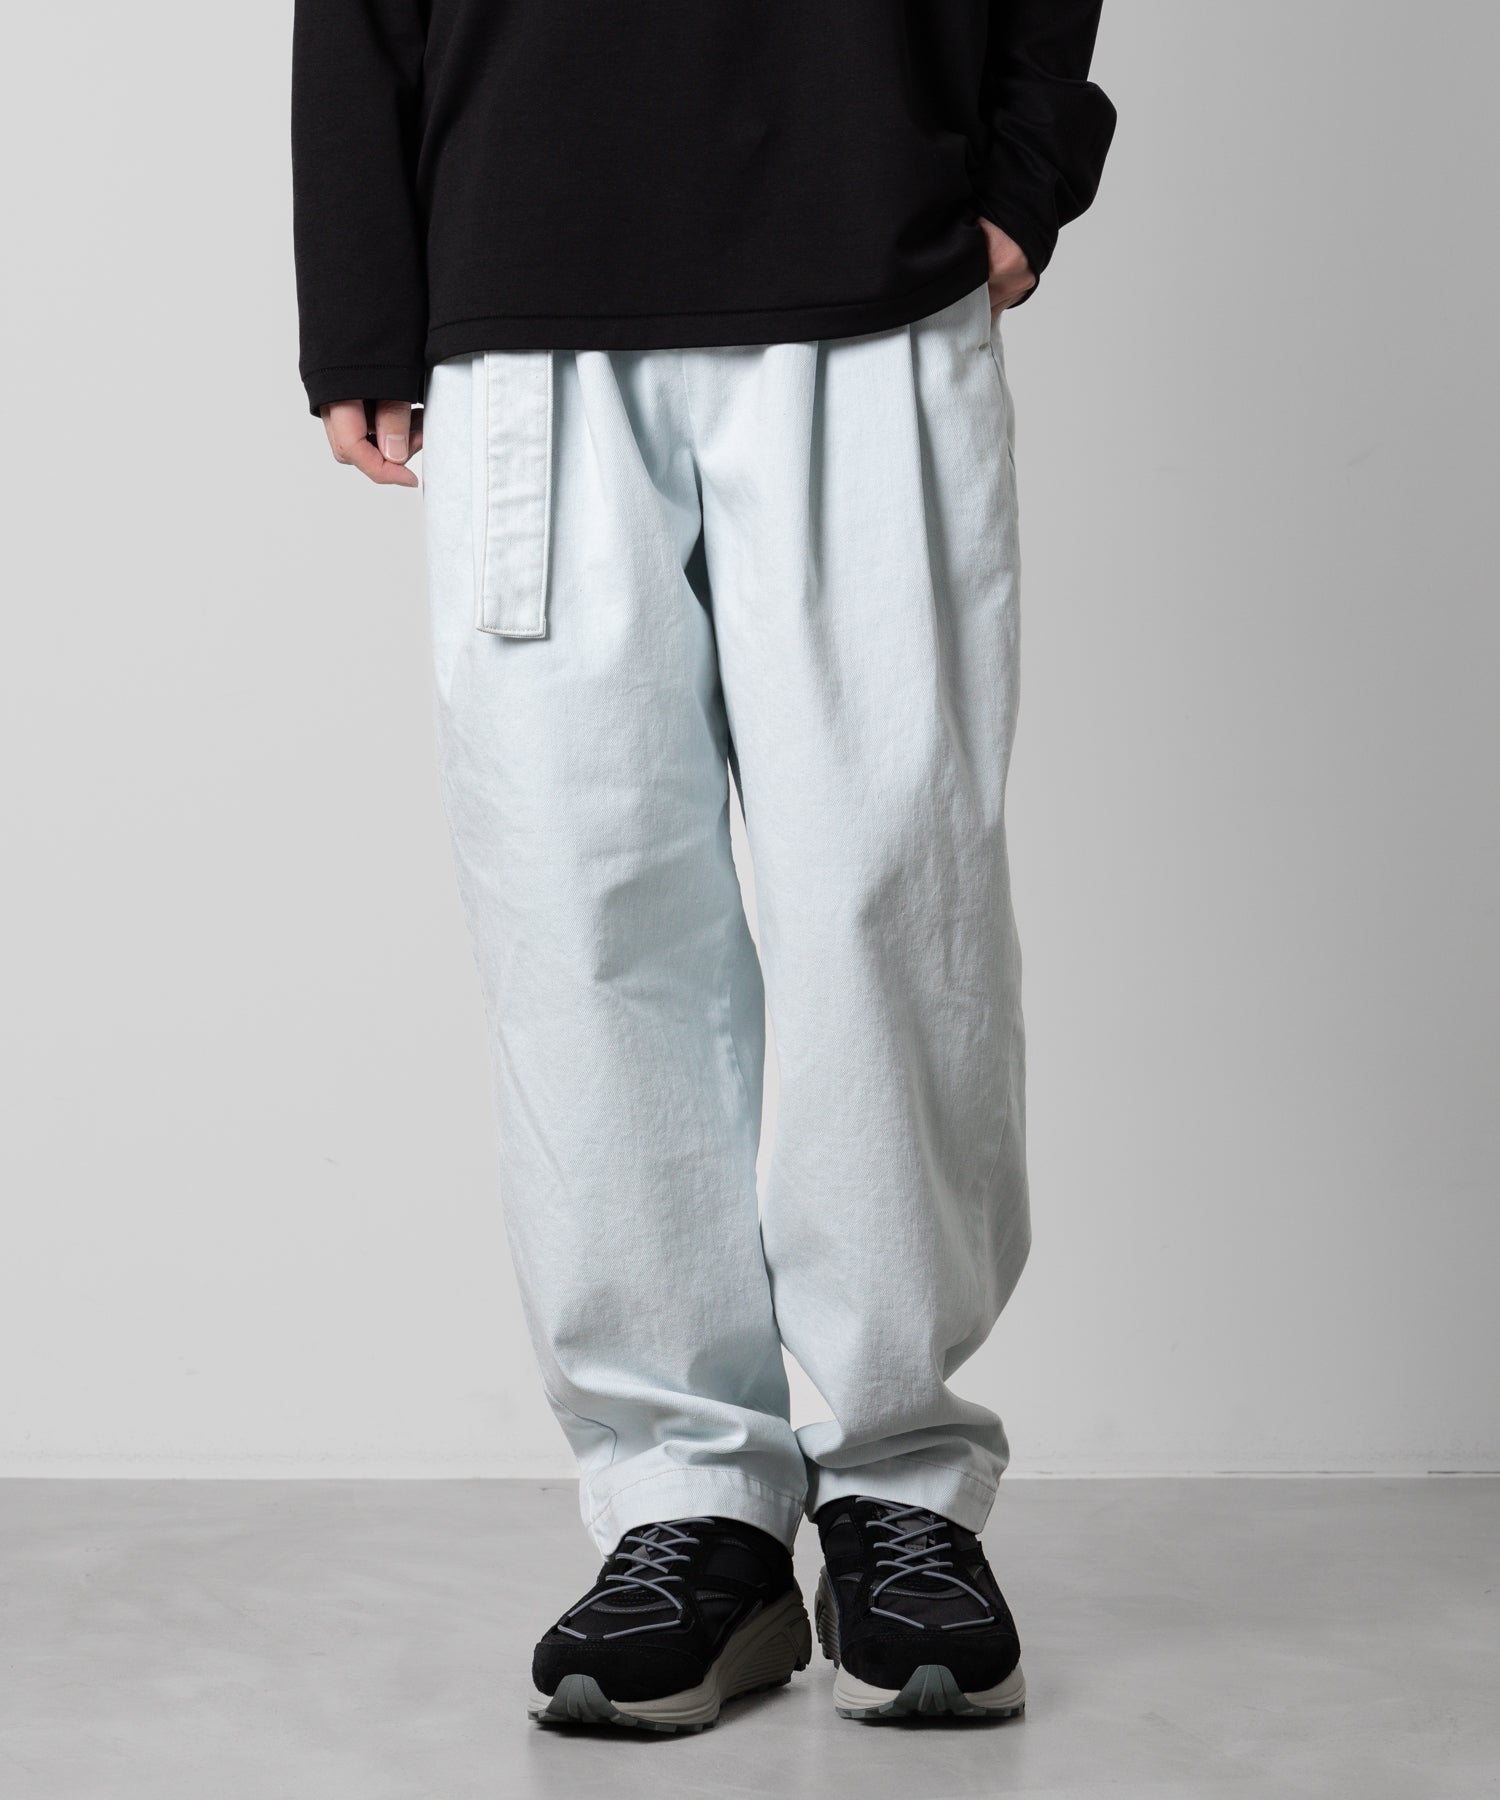 【ATTACHMENT】ATTACHMENT アタッチメントのSUPIMA CO STRETCH DENIM BELTED TAPERED FIT TROUSERS - L.NAVY  公式通販サイトsession福岡セレクトショップ